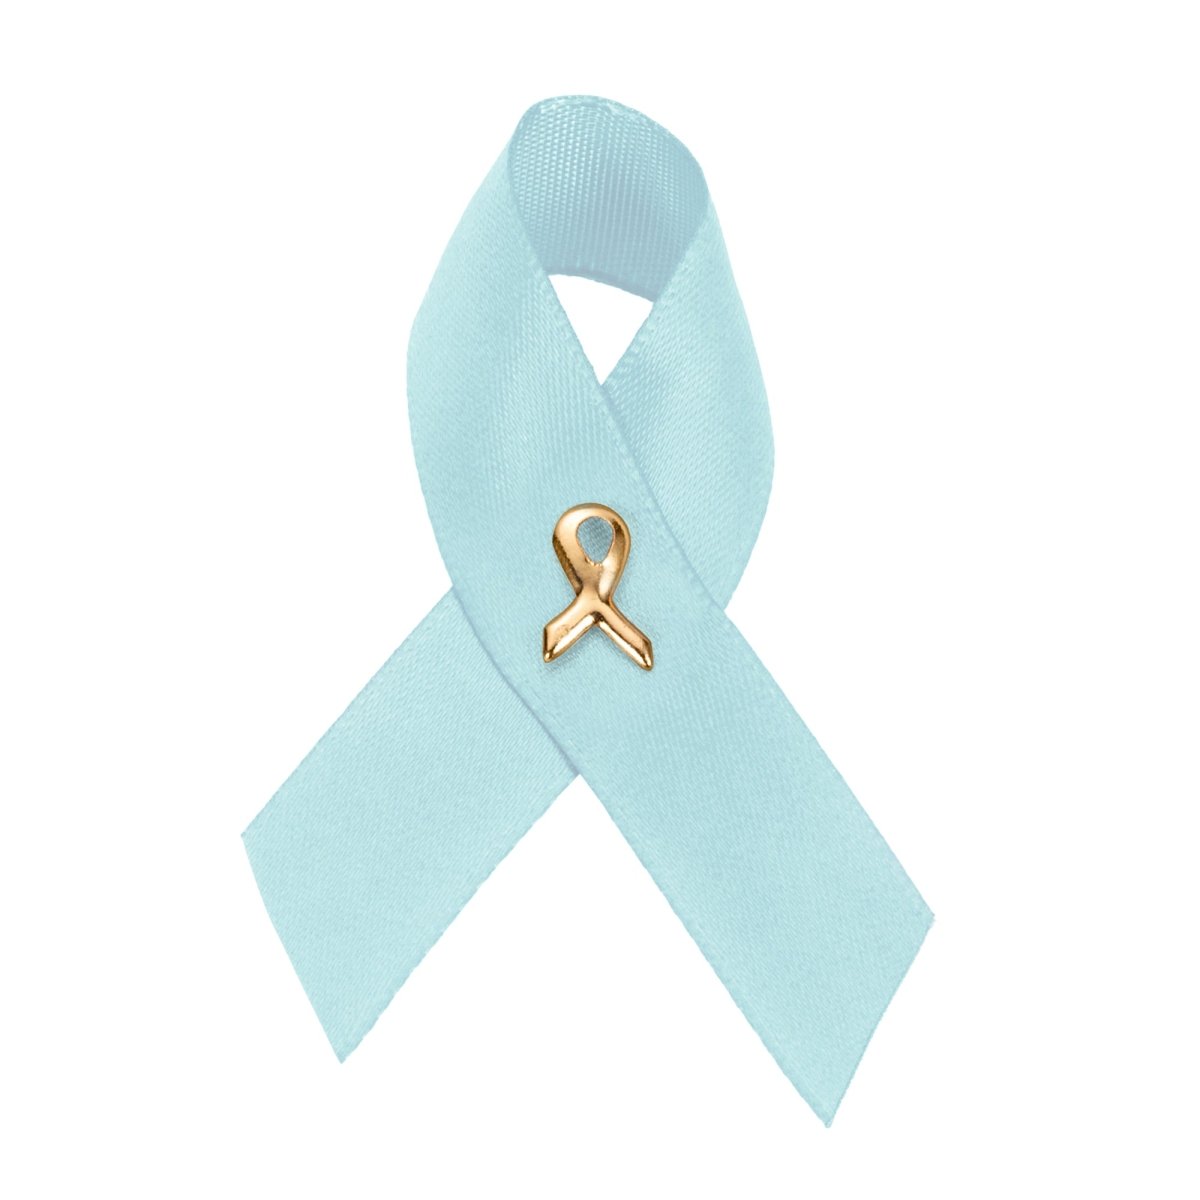 Satin Light Blue Awareness Ribbon Pins - Fundraising For A Cause